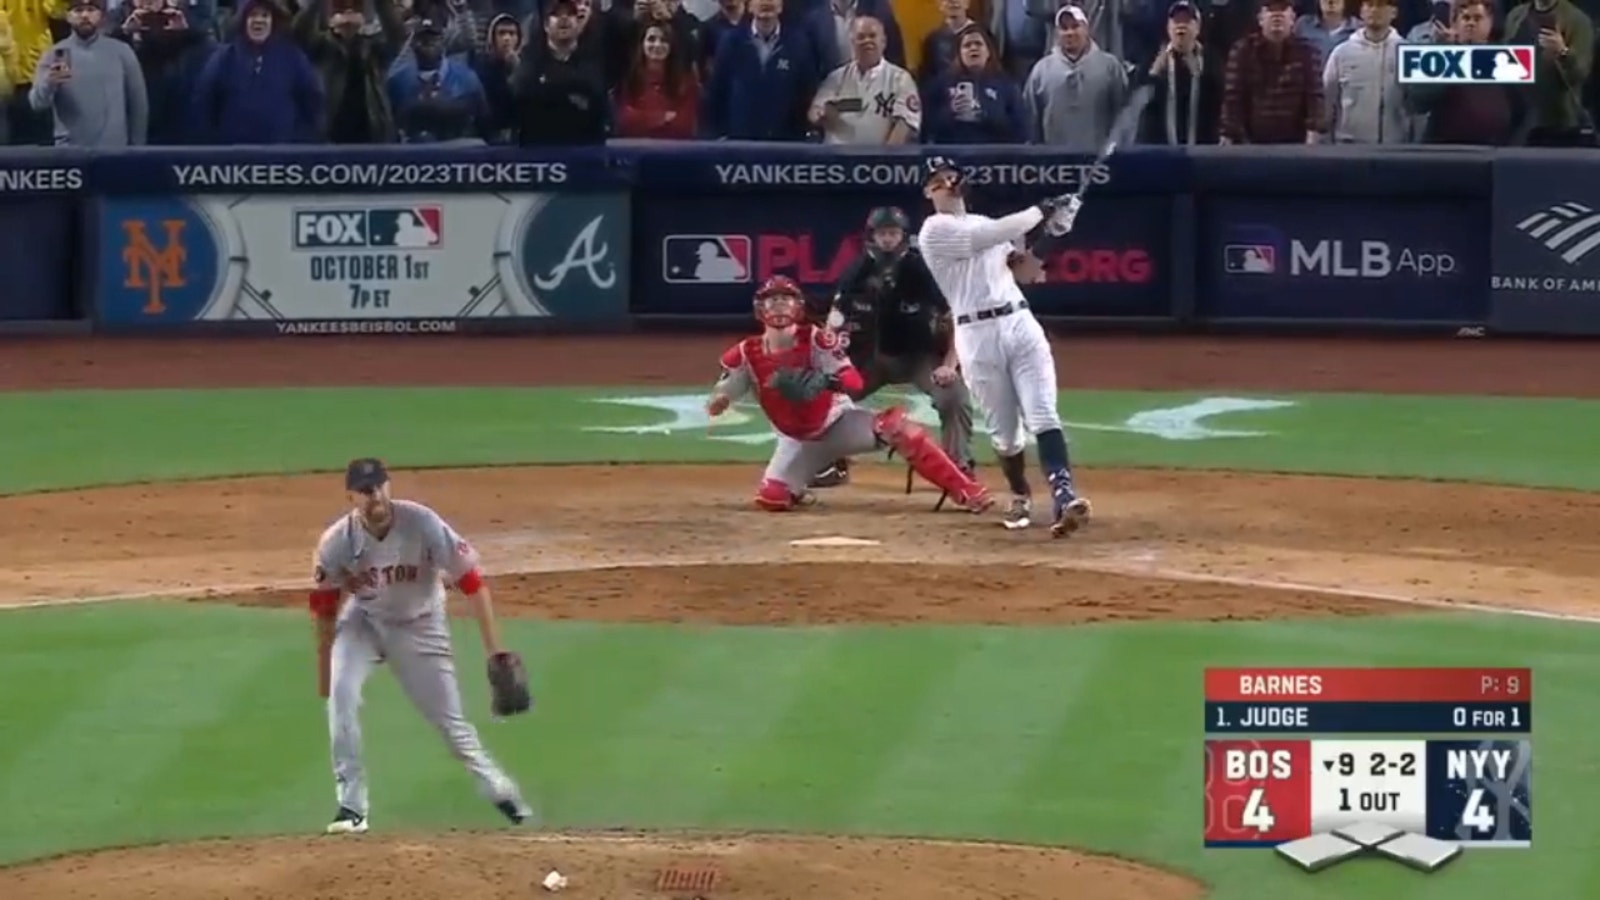 Yankees' Aaron Judge was THIS close to tying Roger Maris' AL HR record